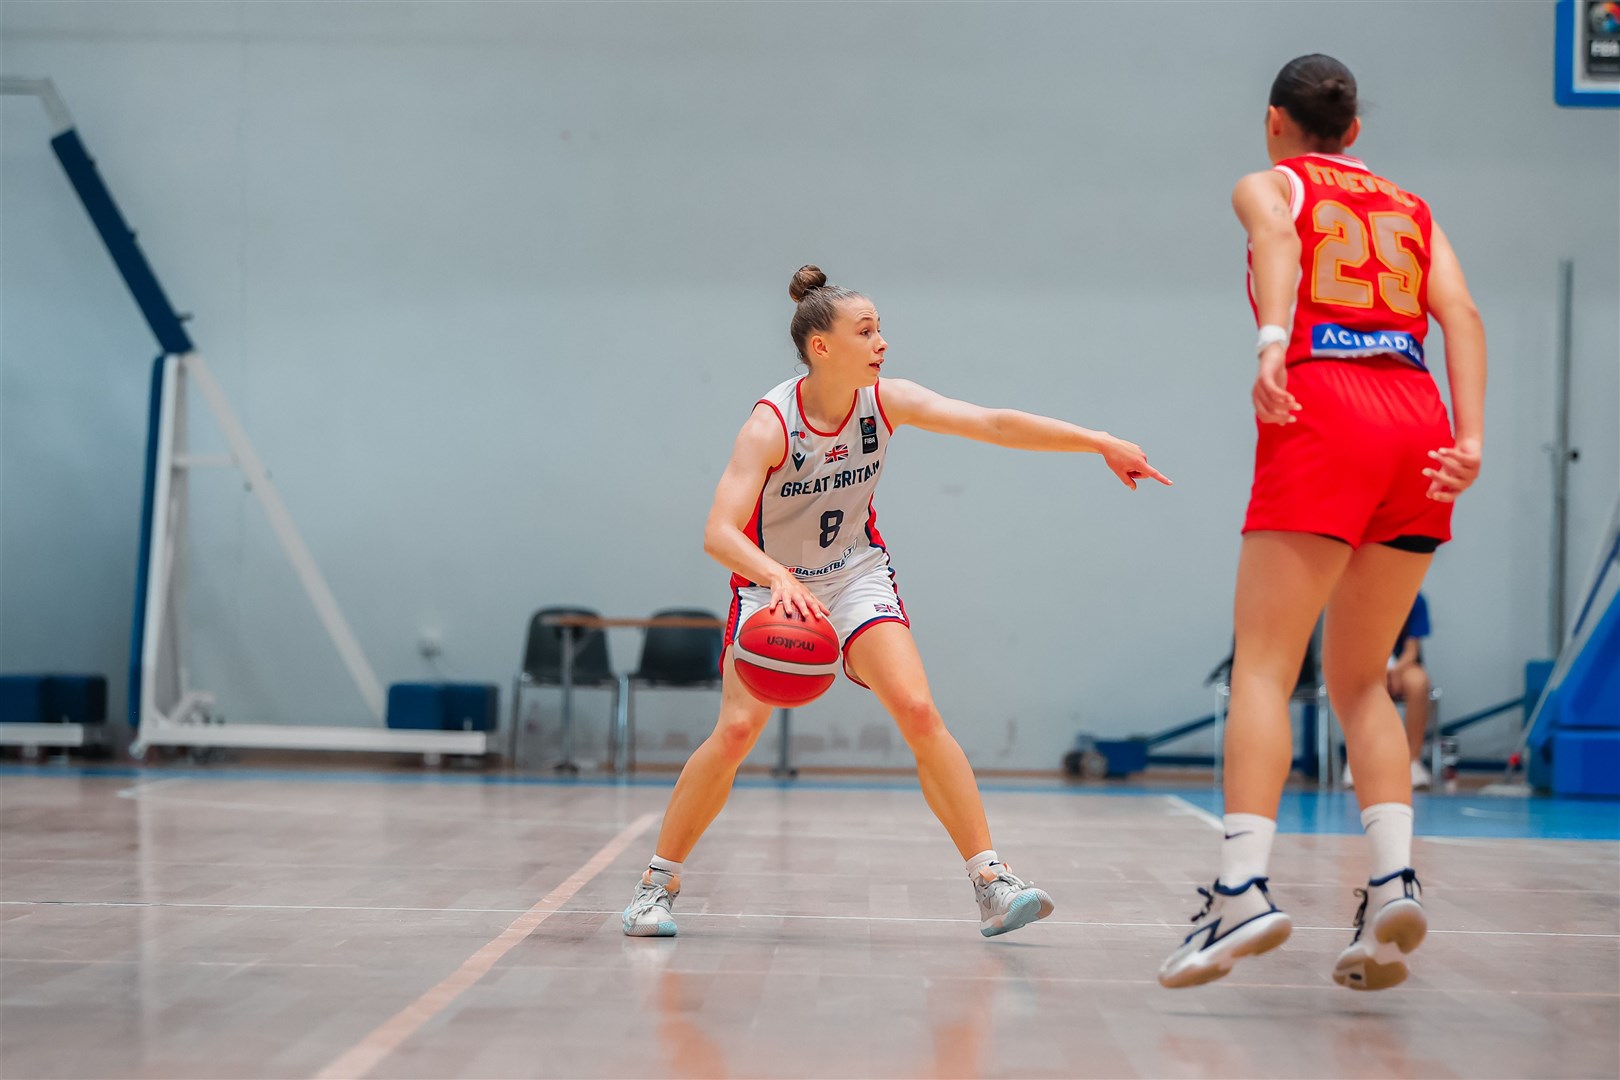 Zoe Sharpe in action for Great Britain